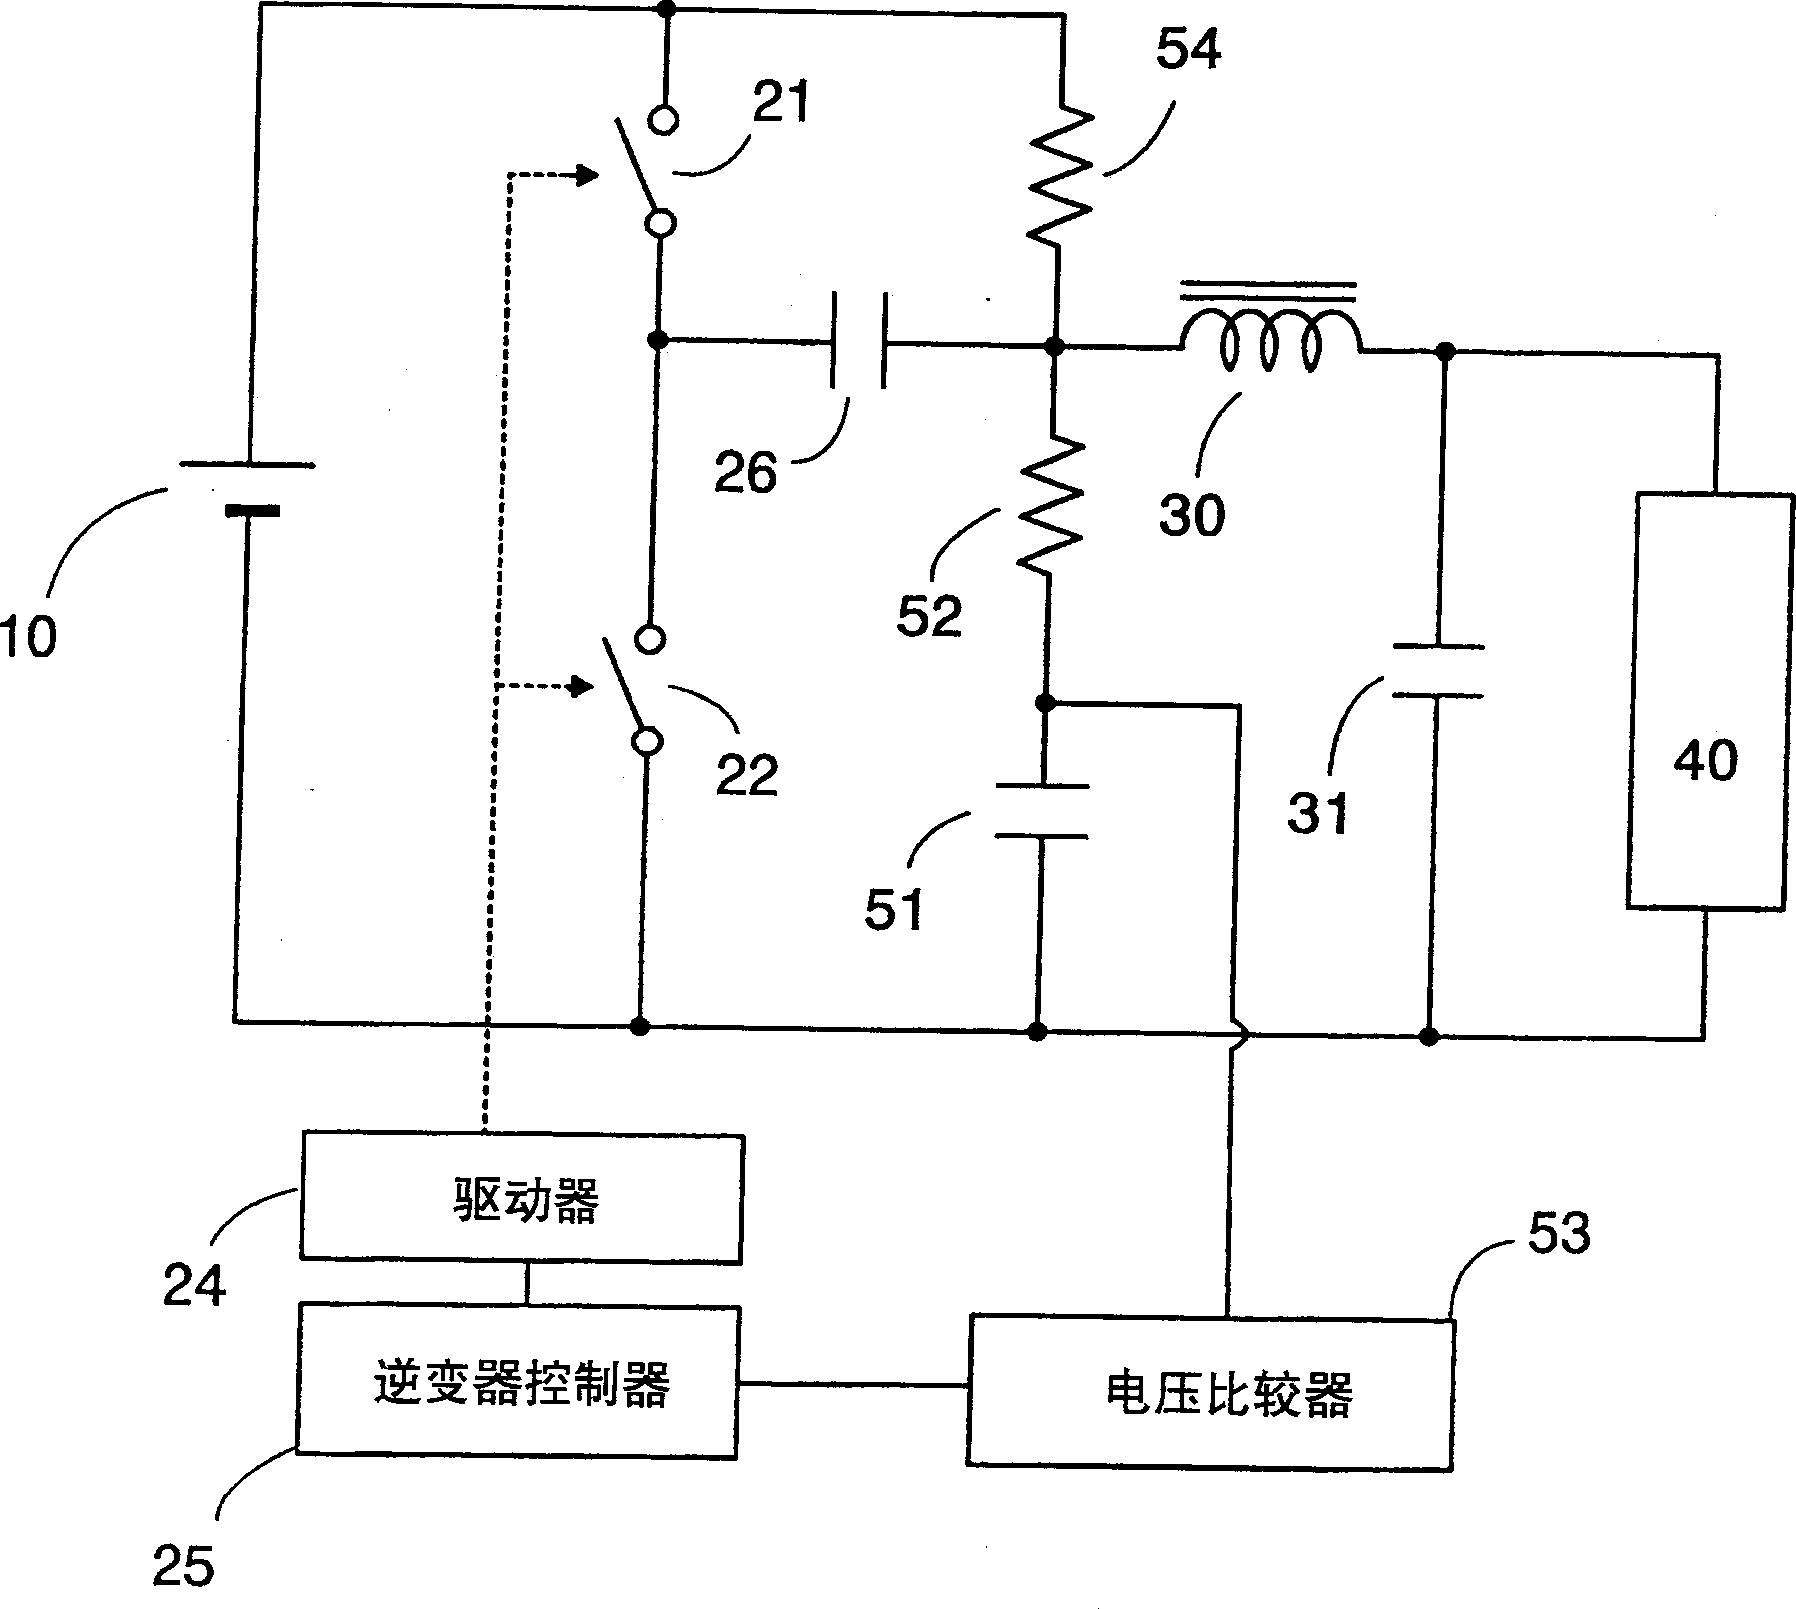 Ballast circuit for operating a discharge lamp